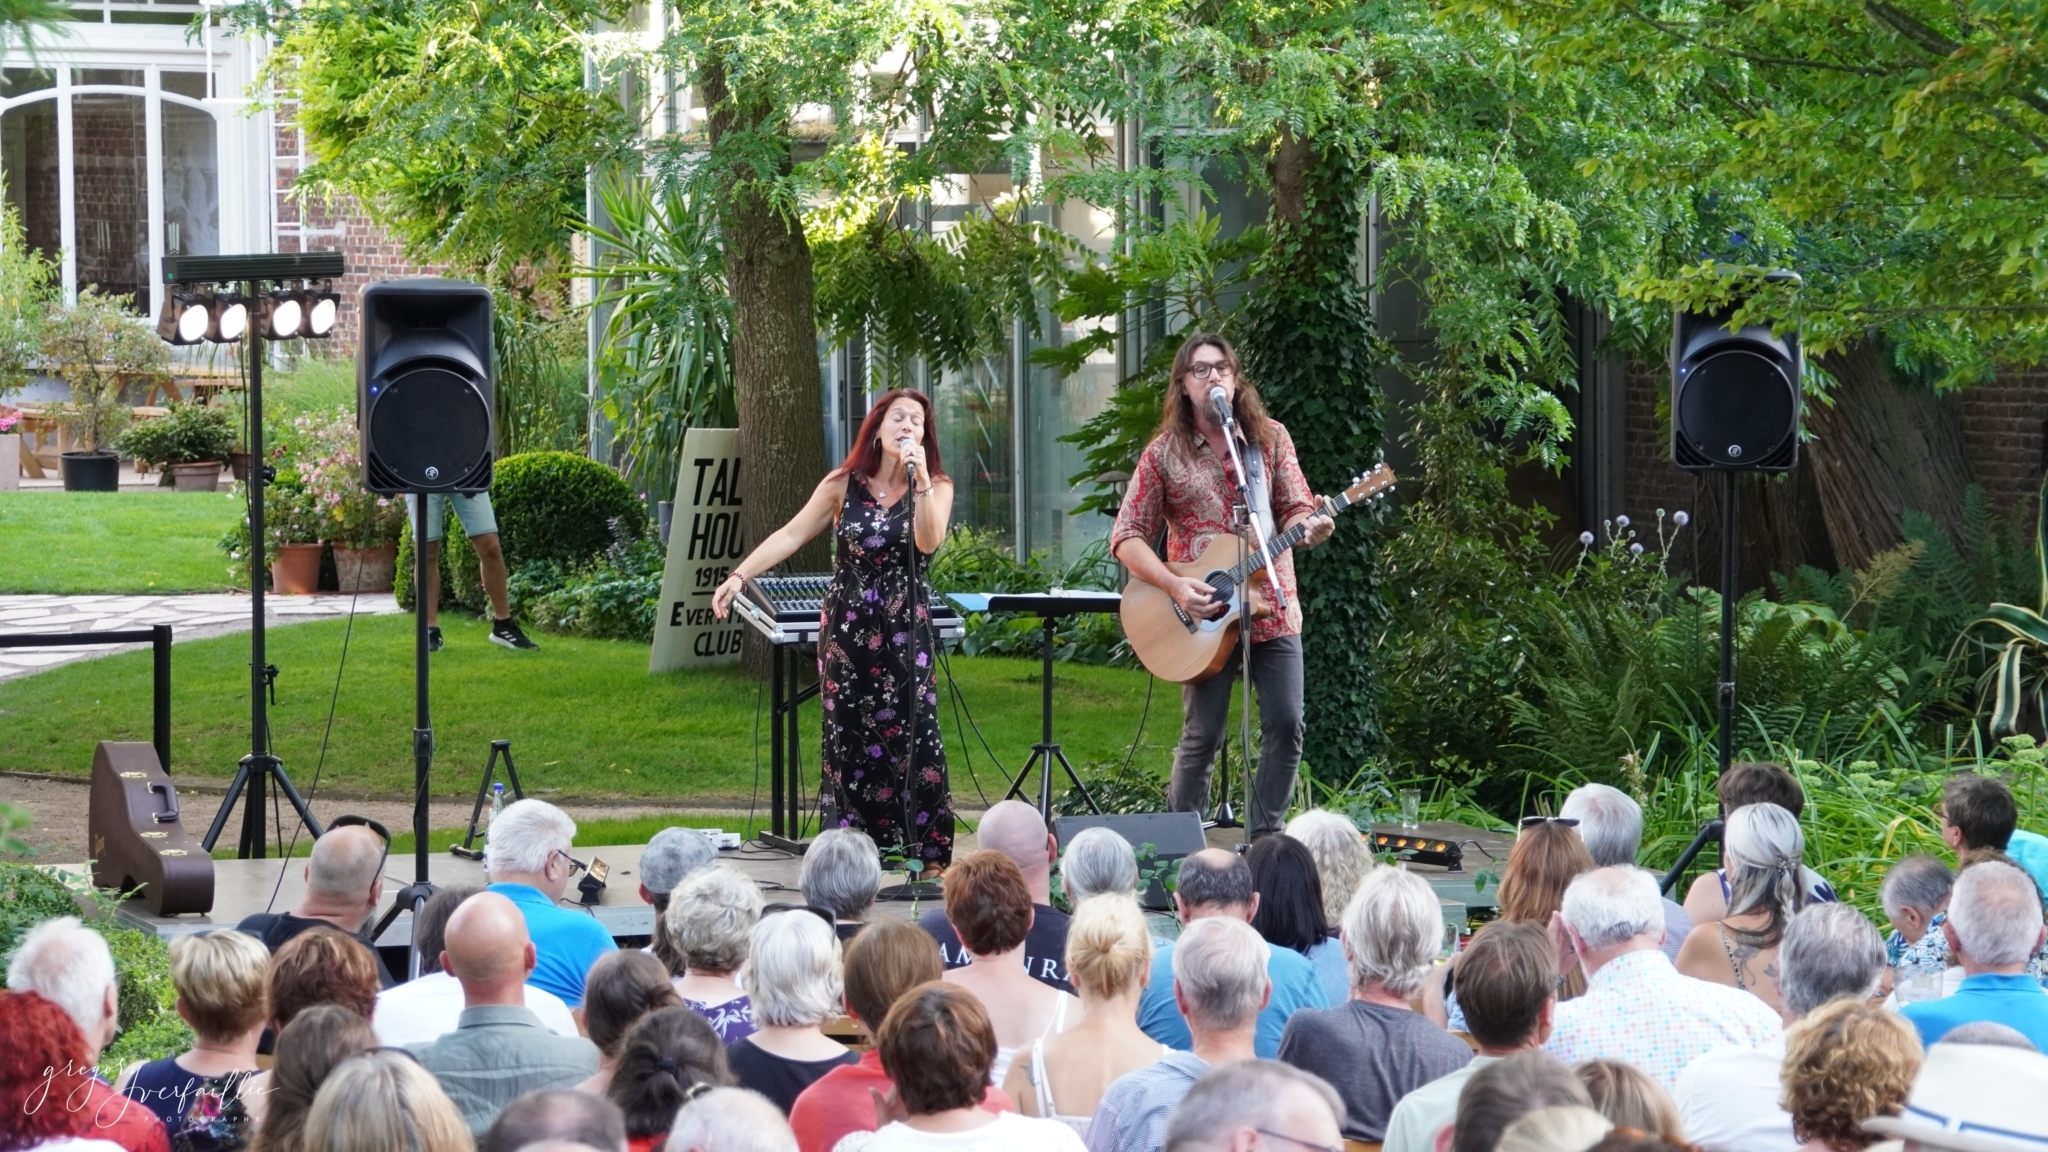 Lun Acoustic optreden tuin Talbot House Poperinge foto Gregory Verfaillie 1